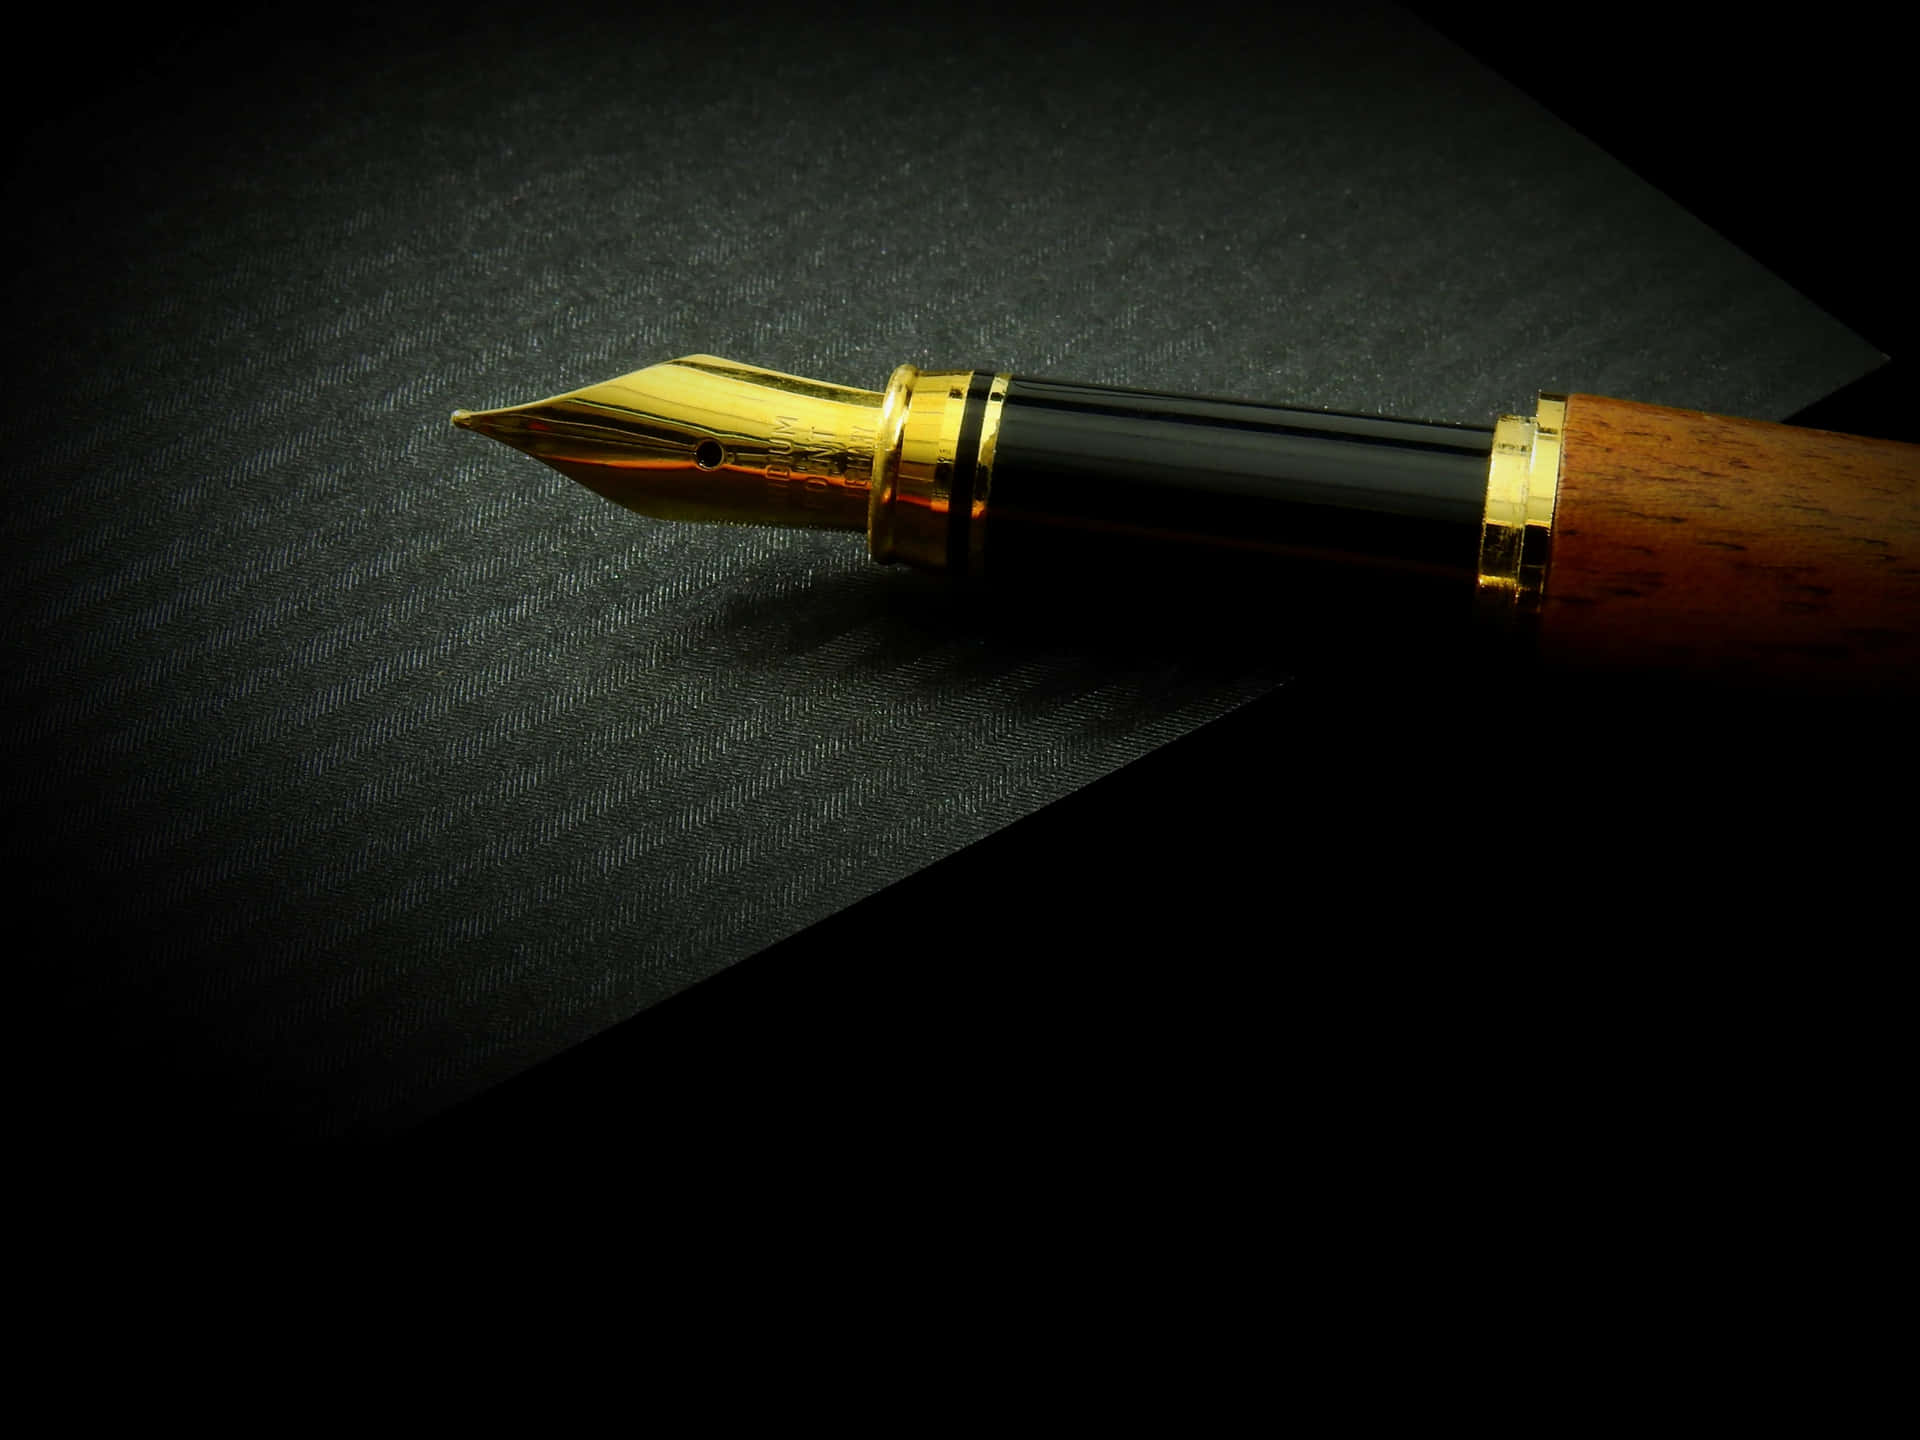 Capture your Ideas with this Elegant Pen